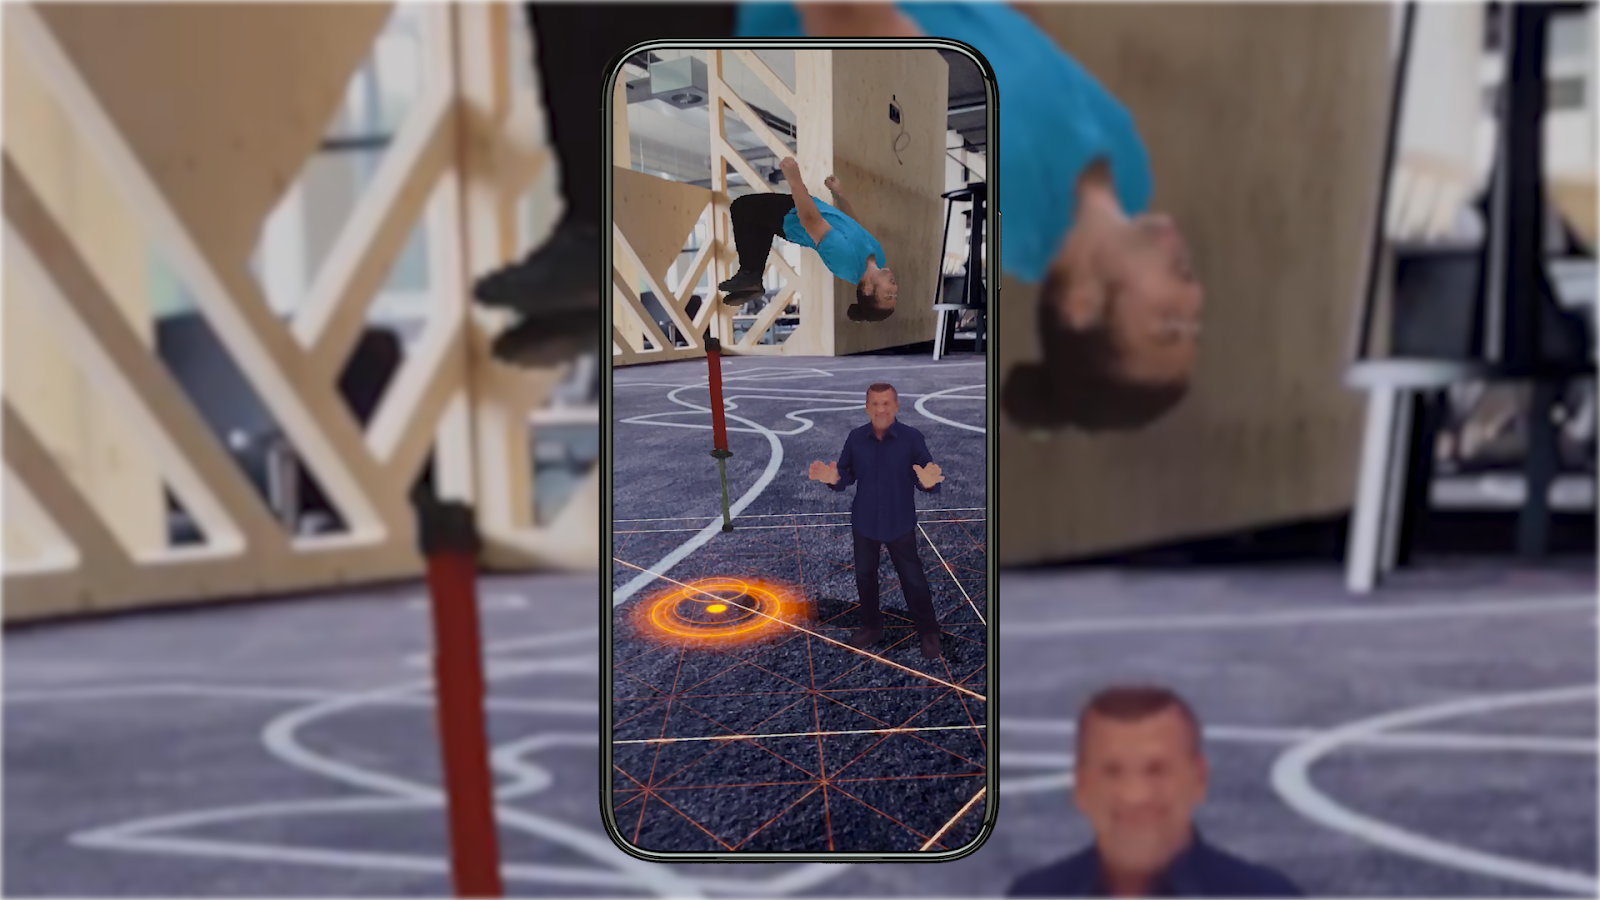 In the foreground, a mobile phone displays the scene of a man backflipping through the air, with another man standing on the ground to his right. In the background, this same image is seen, but blurred out.